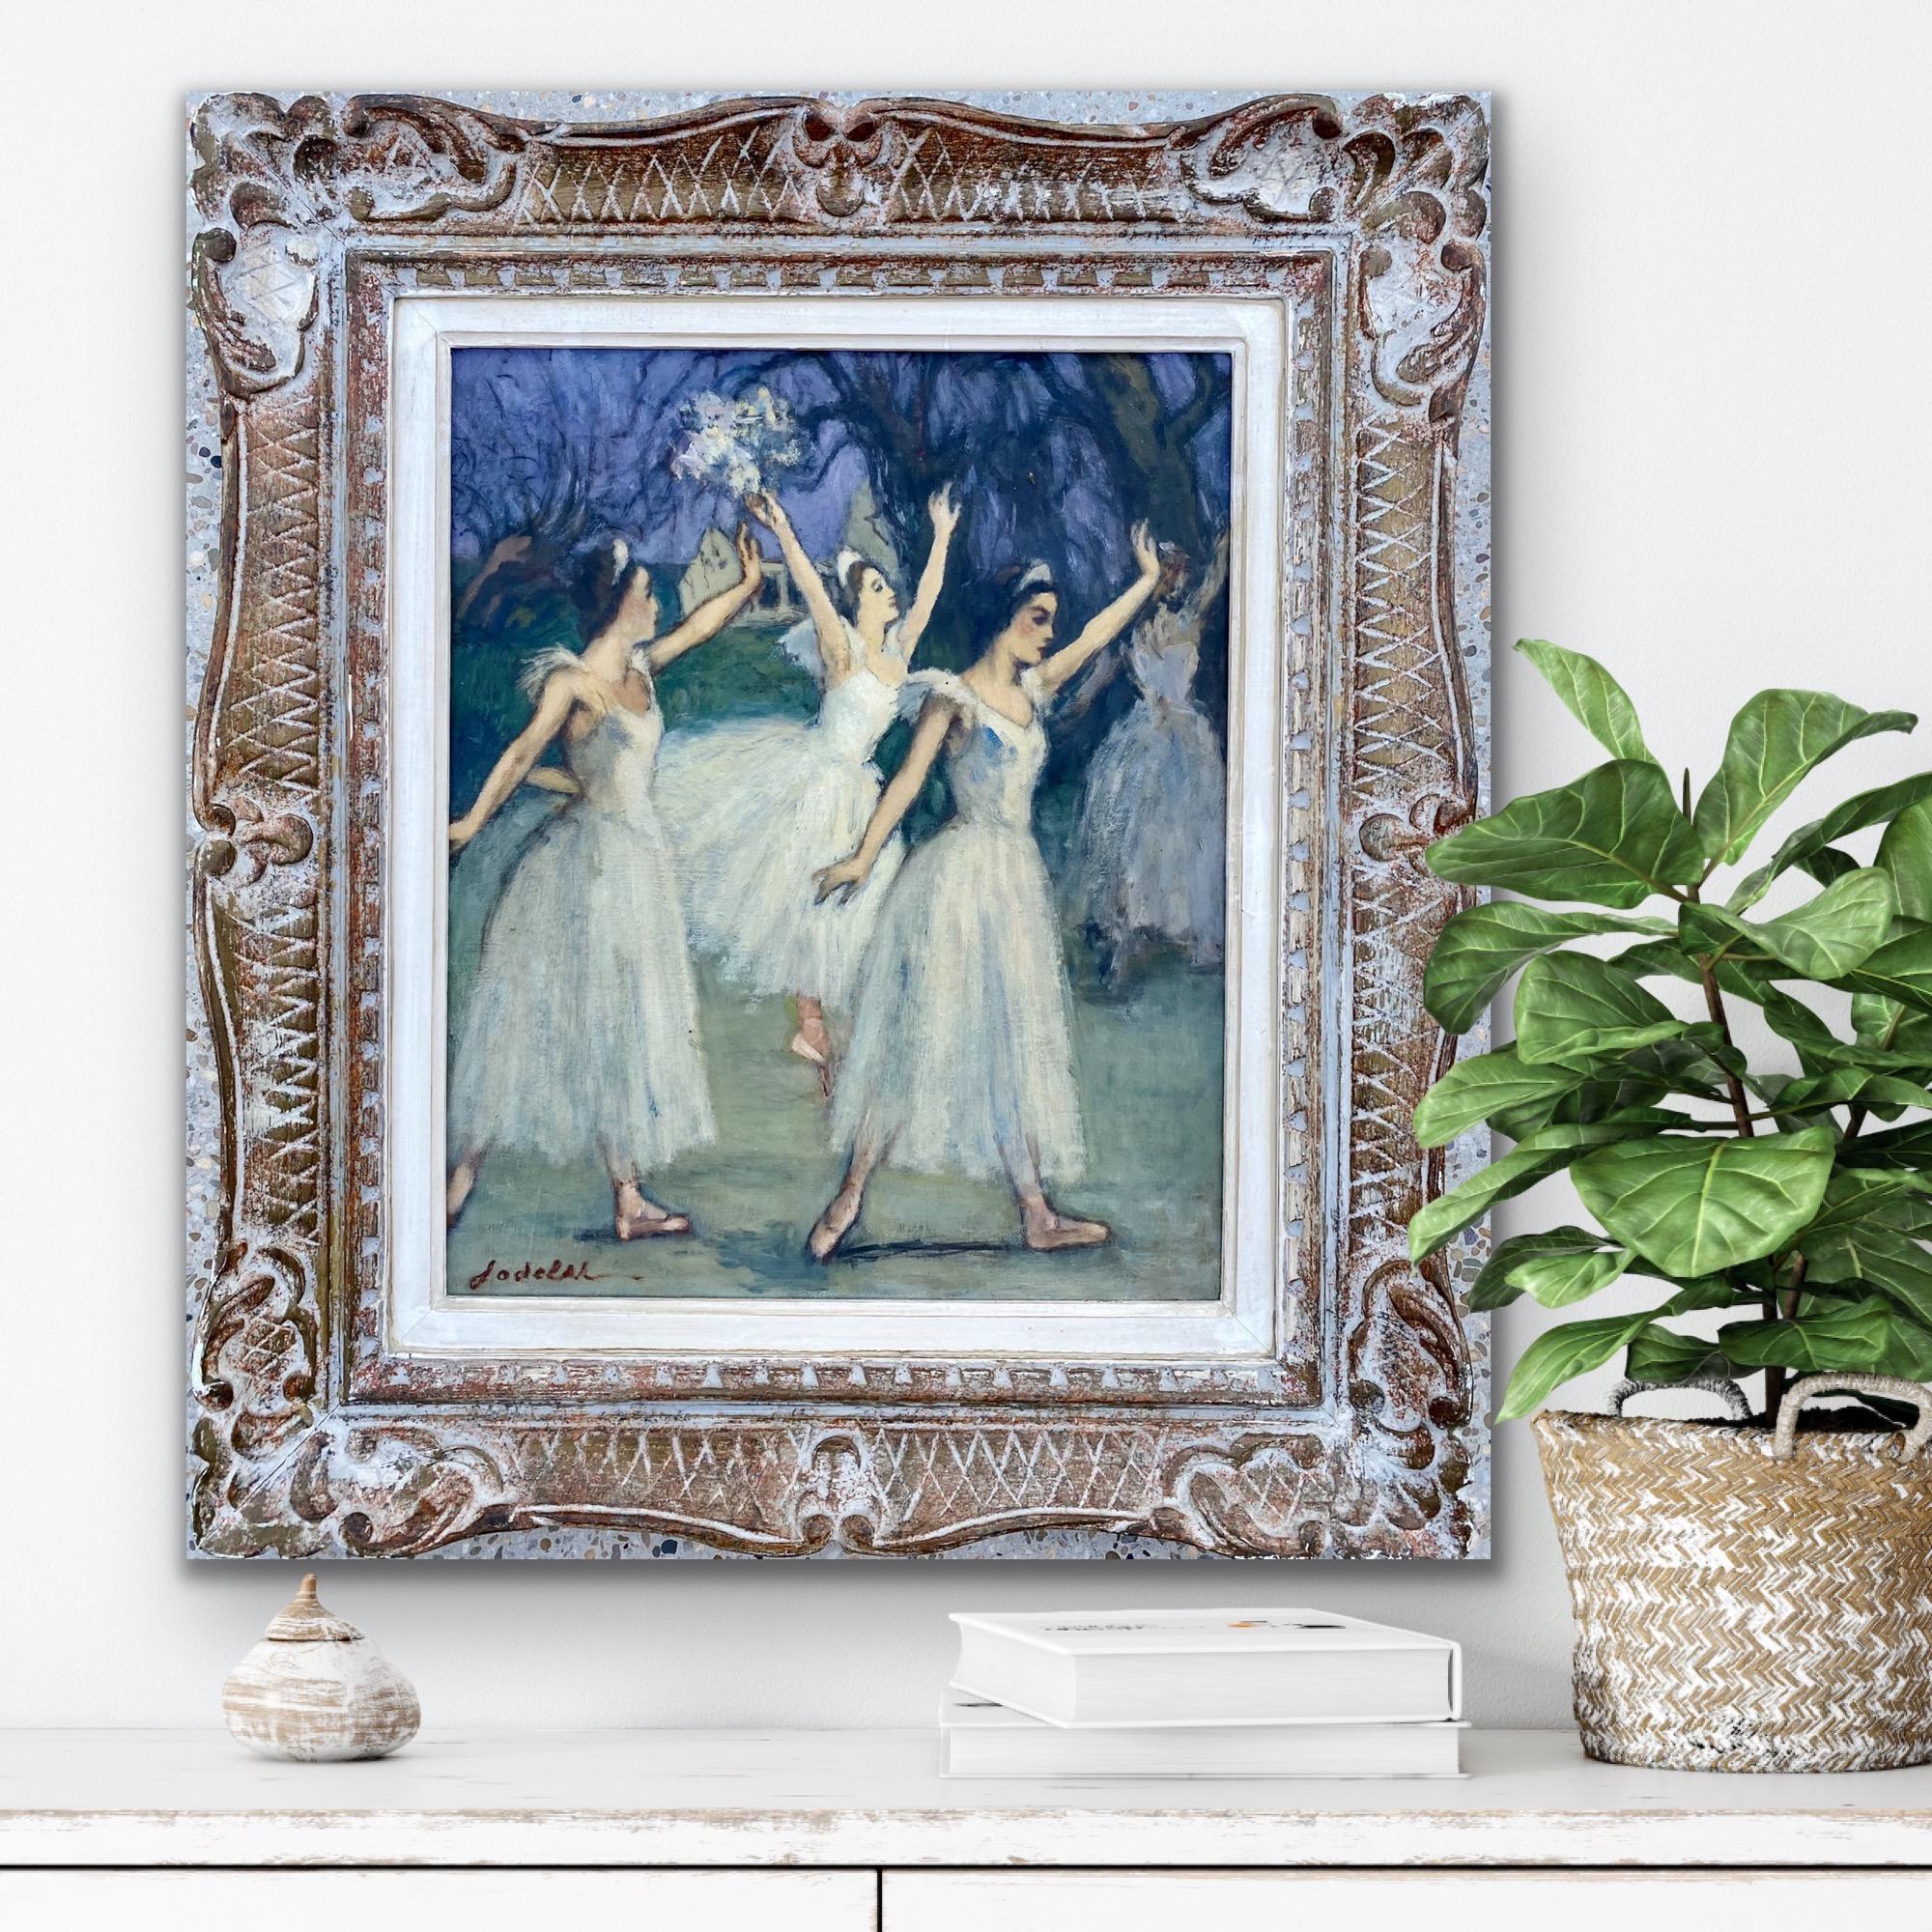 French 19th century style impressionist painting - Ballet - Dance Dancers Degas 2